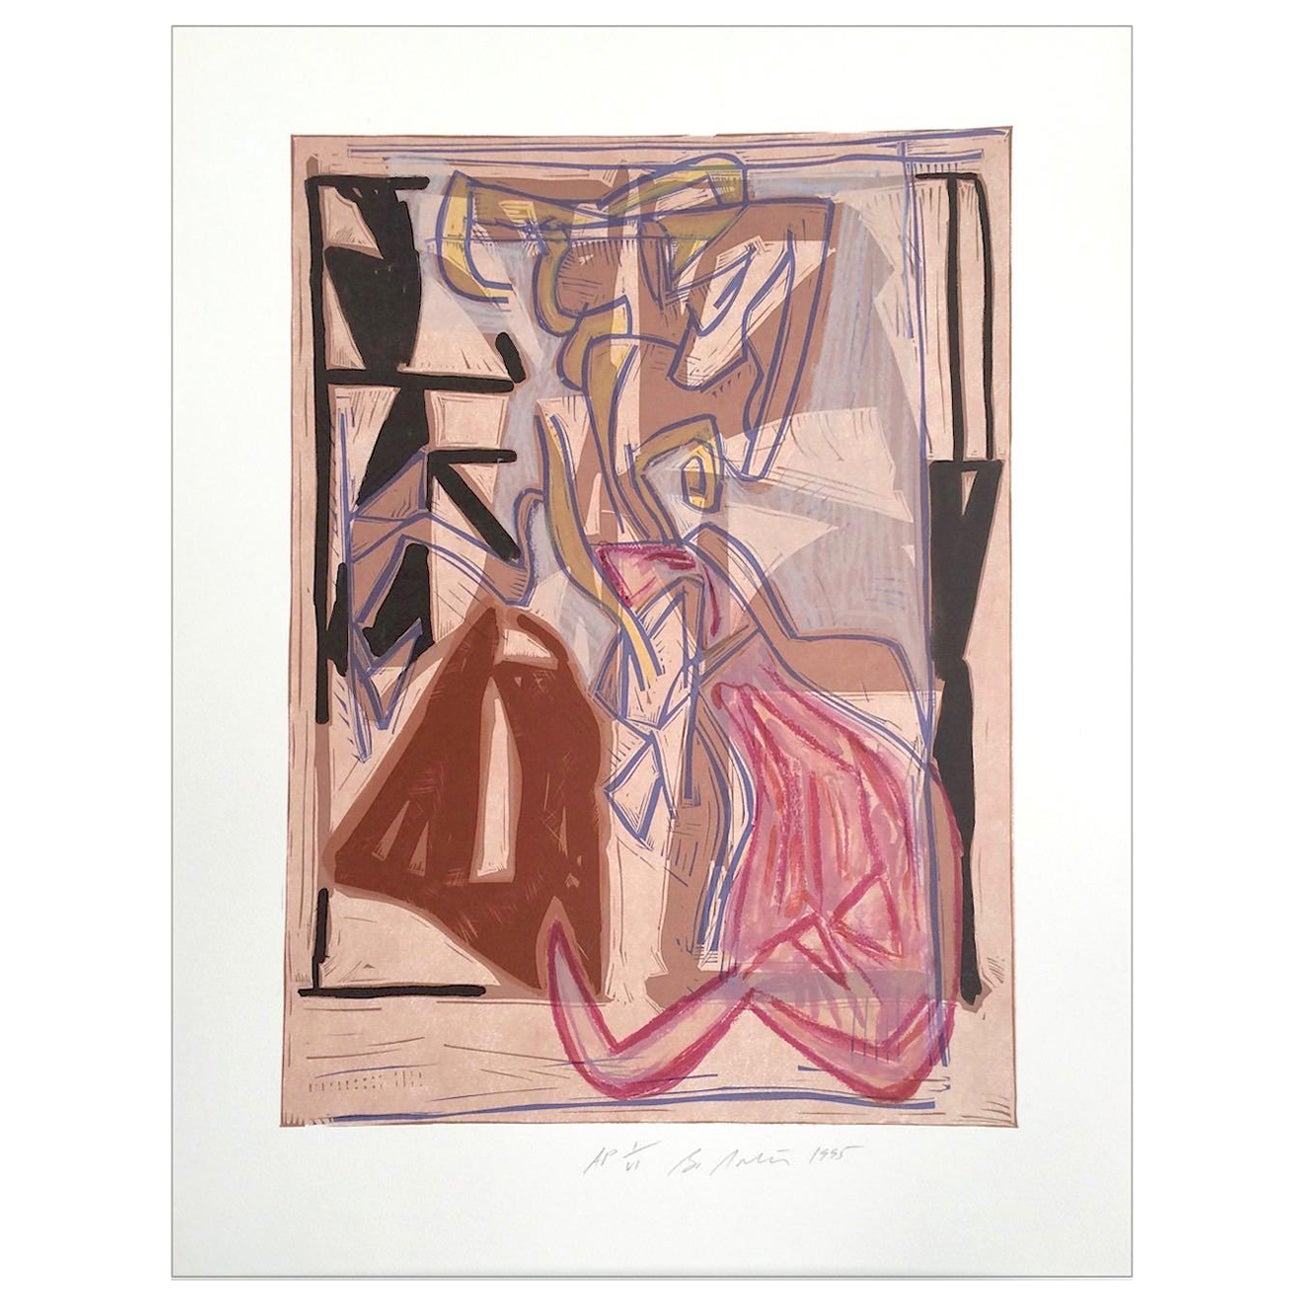 Bruce Porter Print - Composition 2: Beige Pink Modernist Abstract, Signed Lithograph Jazzy Shapes